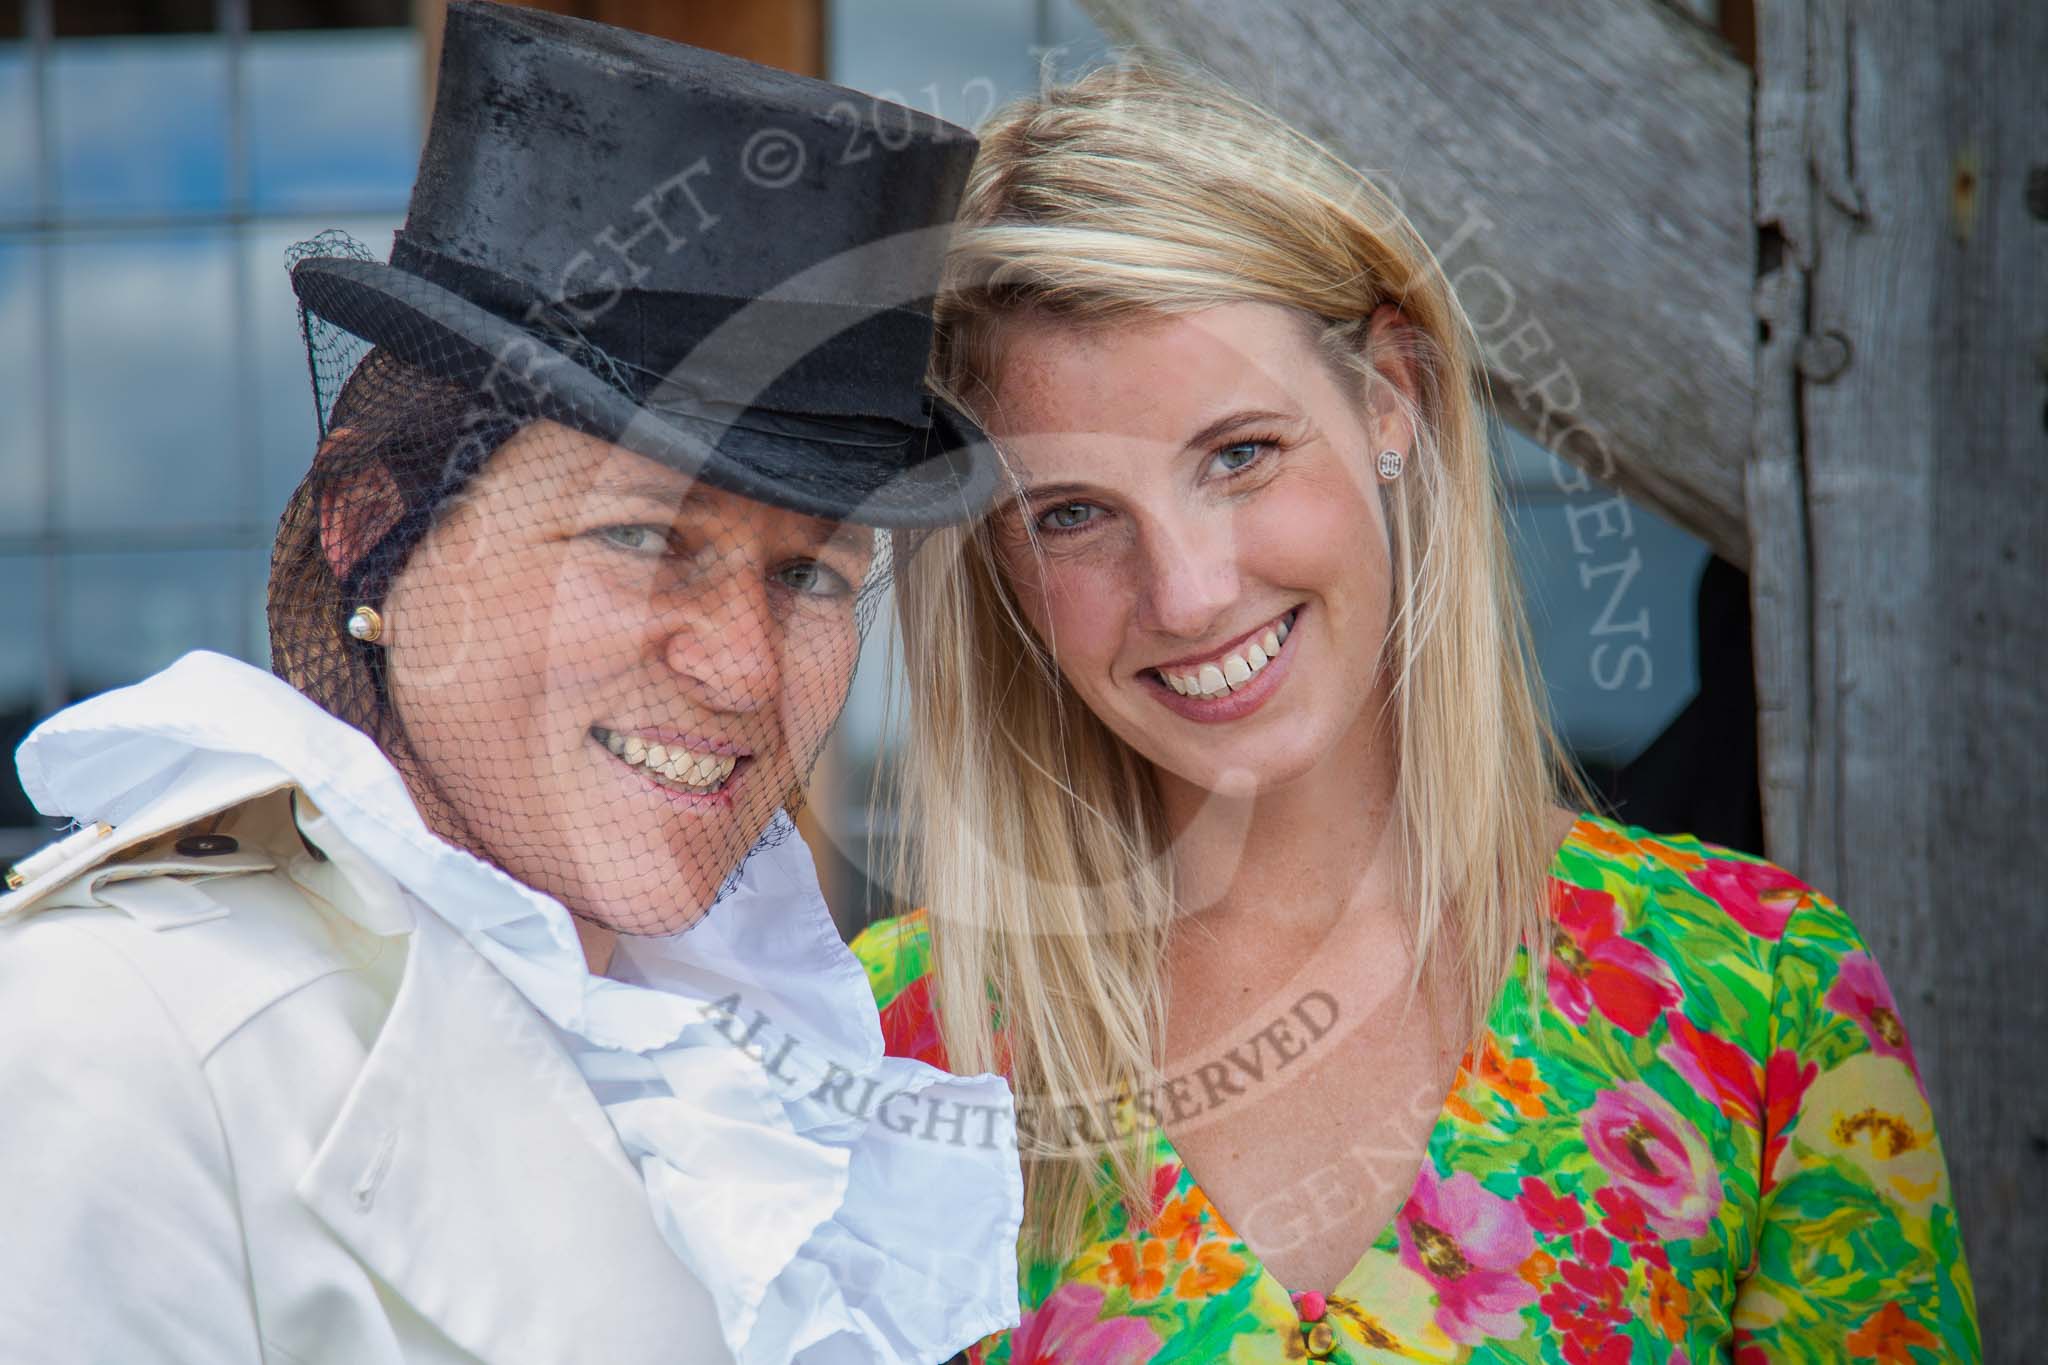 7th Heritage Polo Cup finals: Founder of HERITAGE POLO Barbara P Zingg & Sponsor Claire Cotton of "Cotton & Gems".
Hurtwood Park Polo Club,
Ewhurst Green,
Surrey,
United Kingdom,
on 05 August 2012 at 14:31, image #80